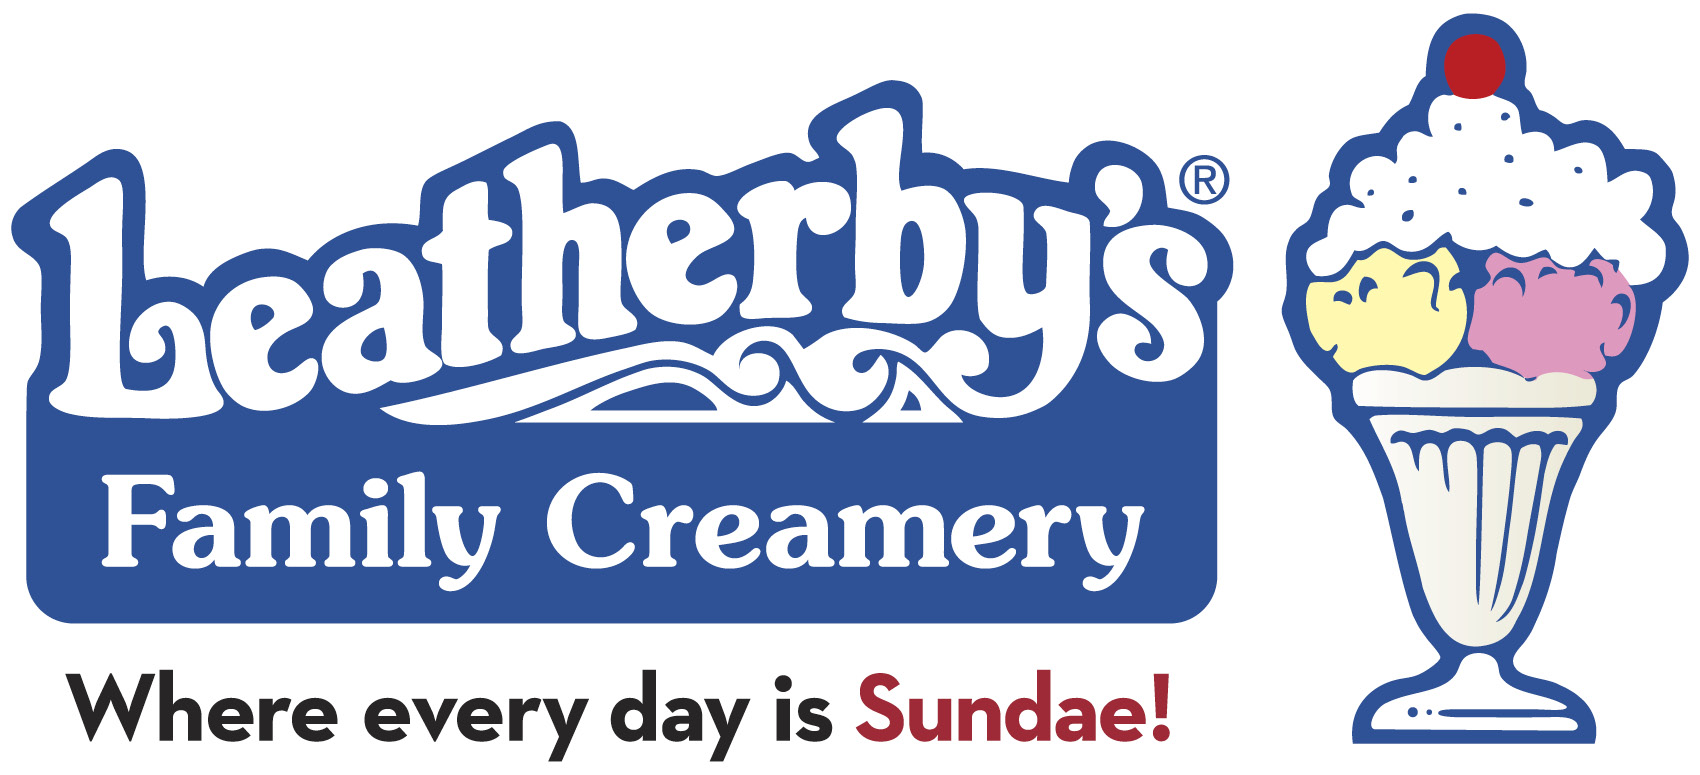 Leatherby's